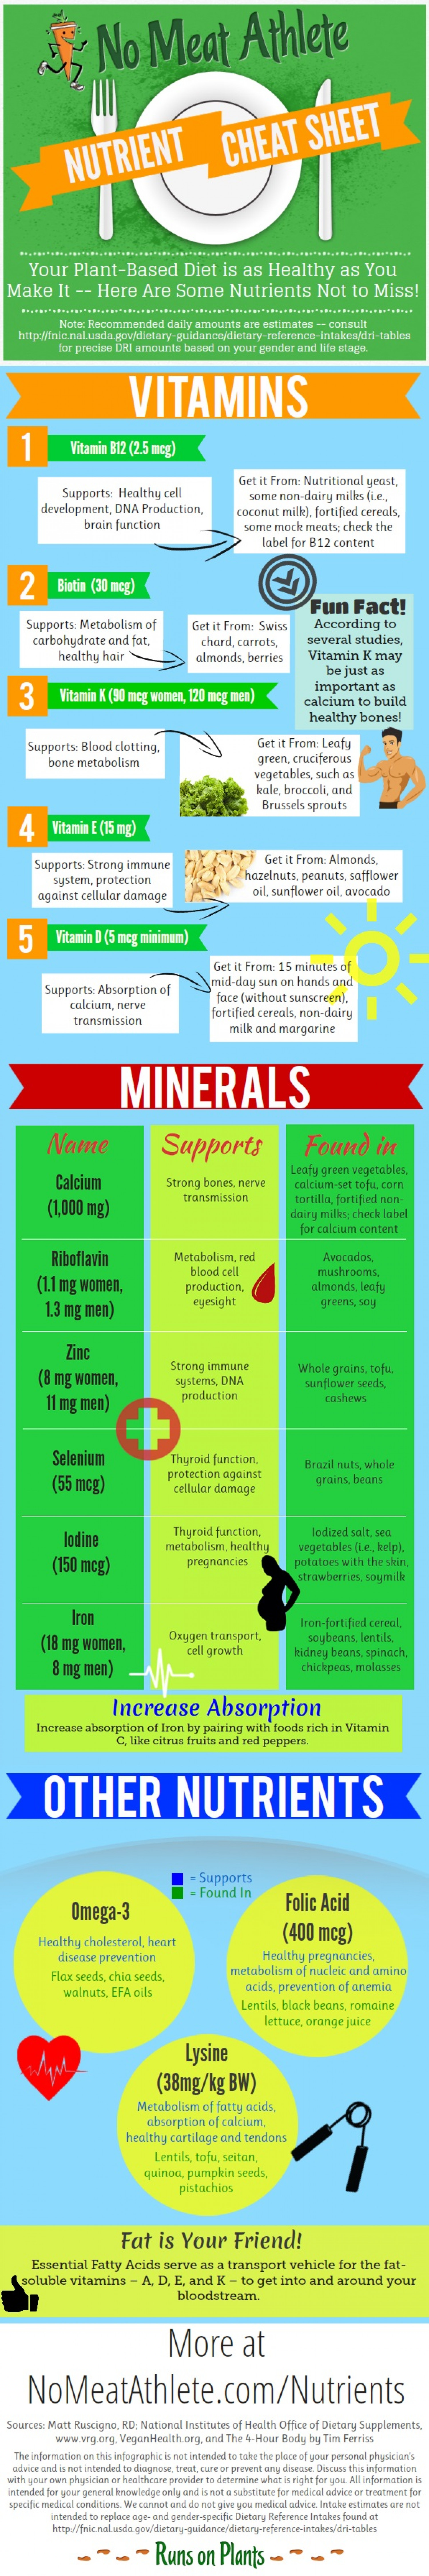 No Meat Athlete Nutrient Cheat Sheet Infographic